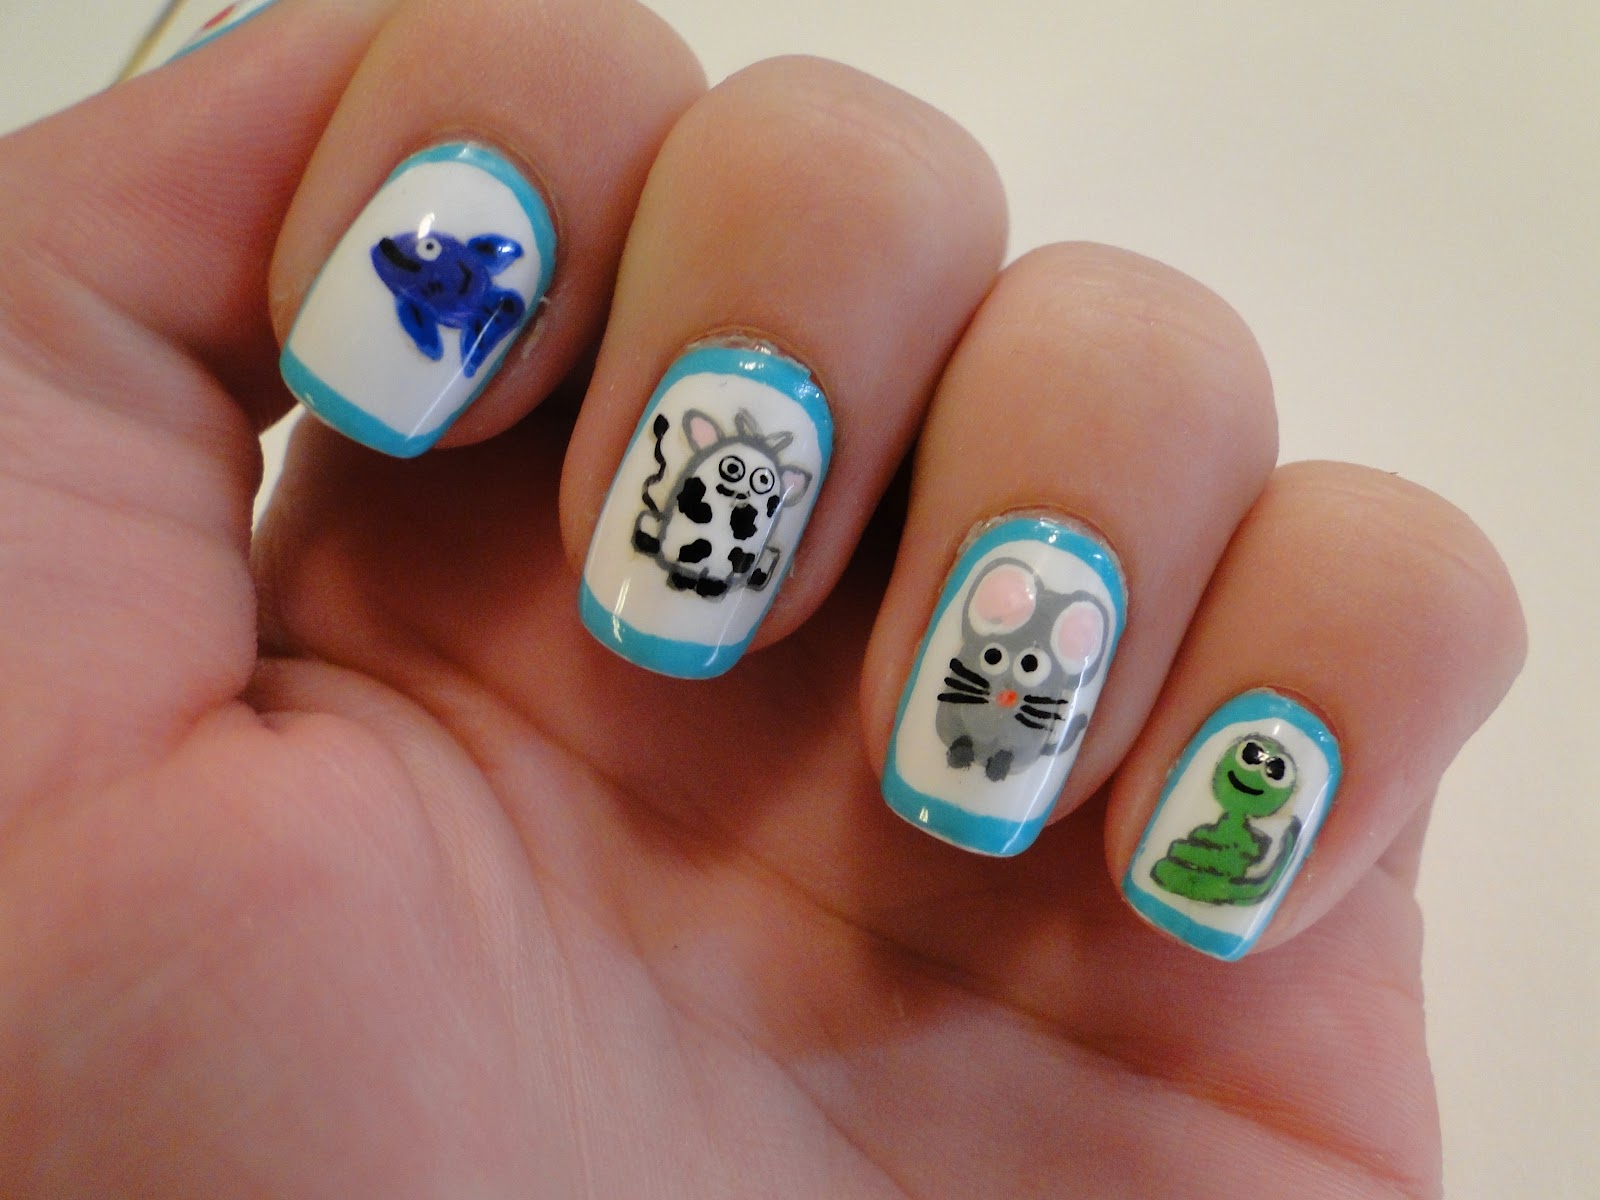 3. Adorable Animal Nail Art for Kids - wide 6